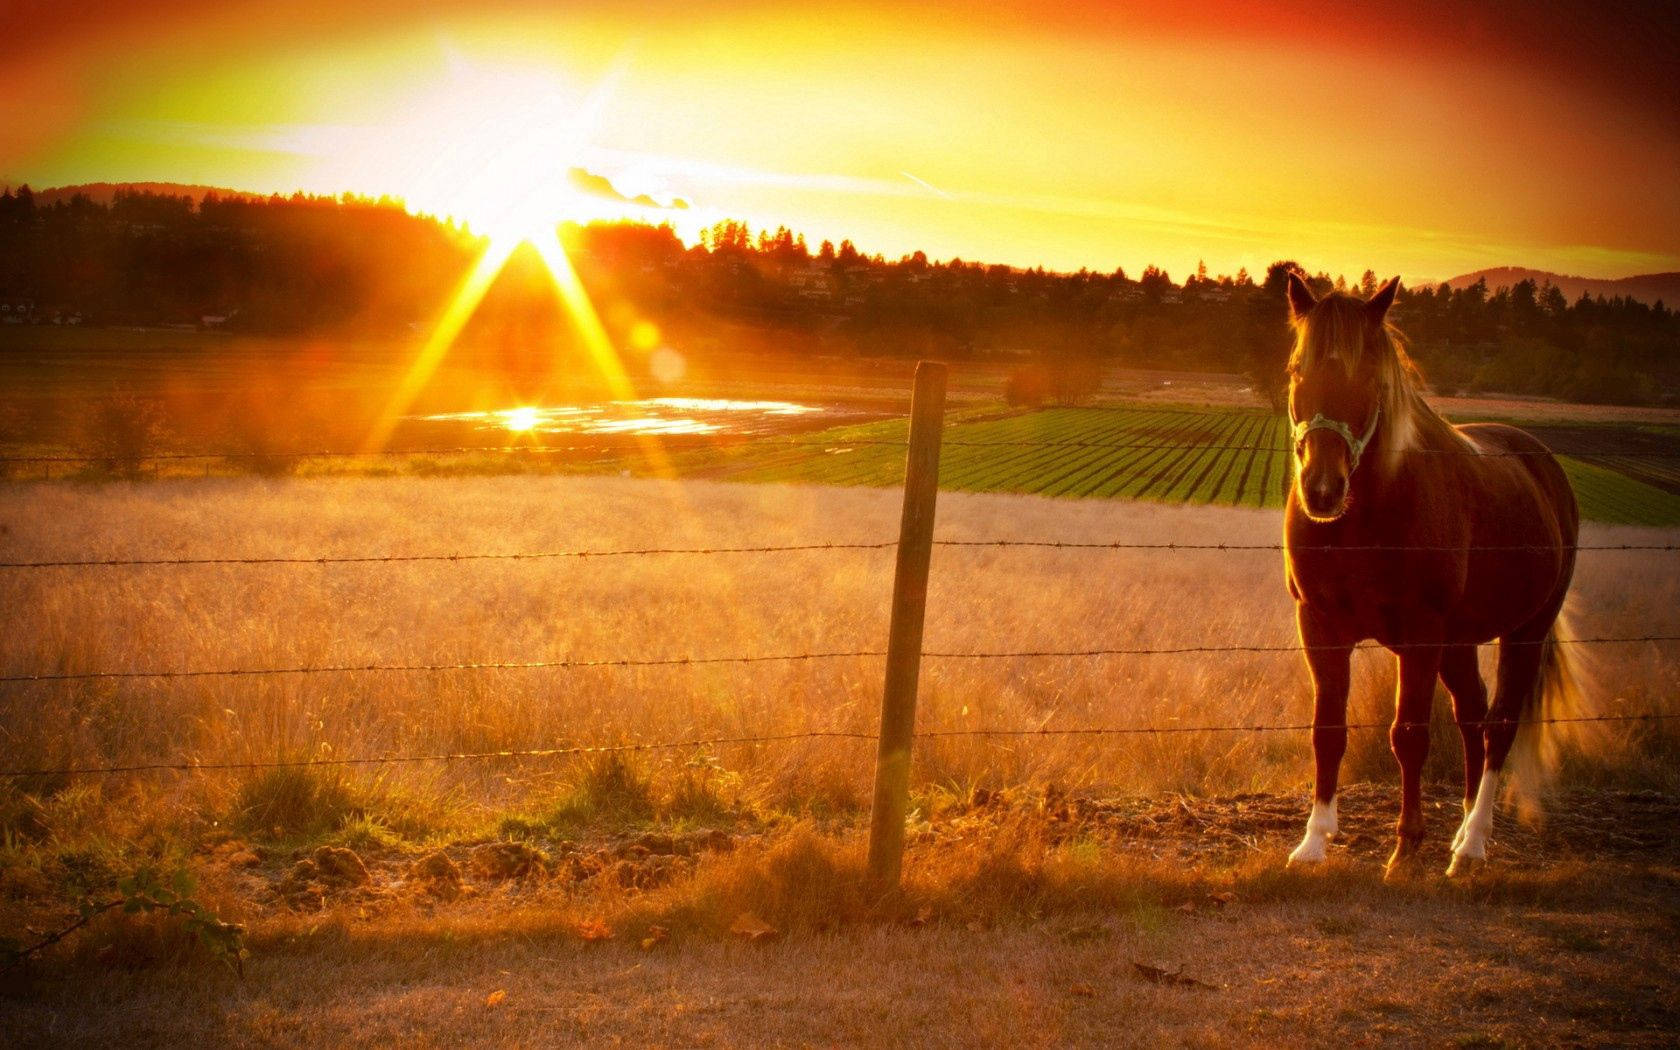 A horse in peaceful serenity as the sun sets. Wallpaper